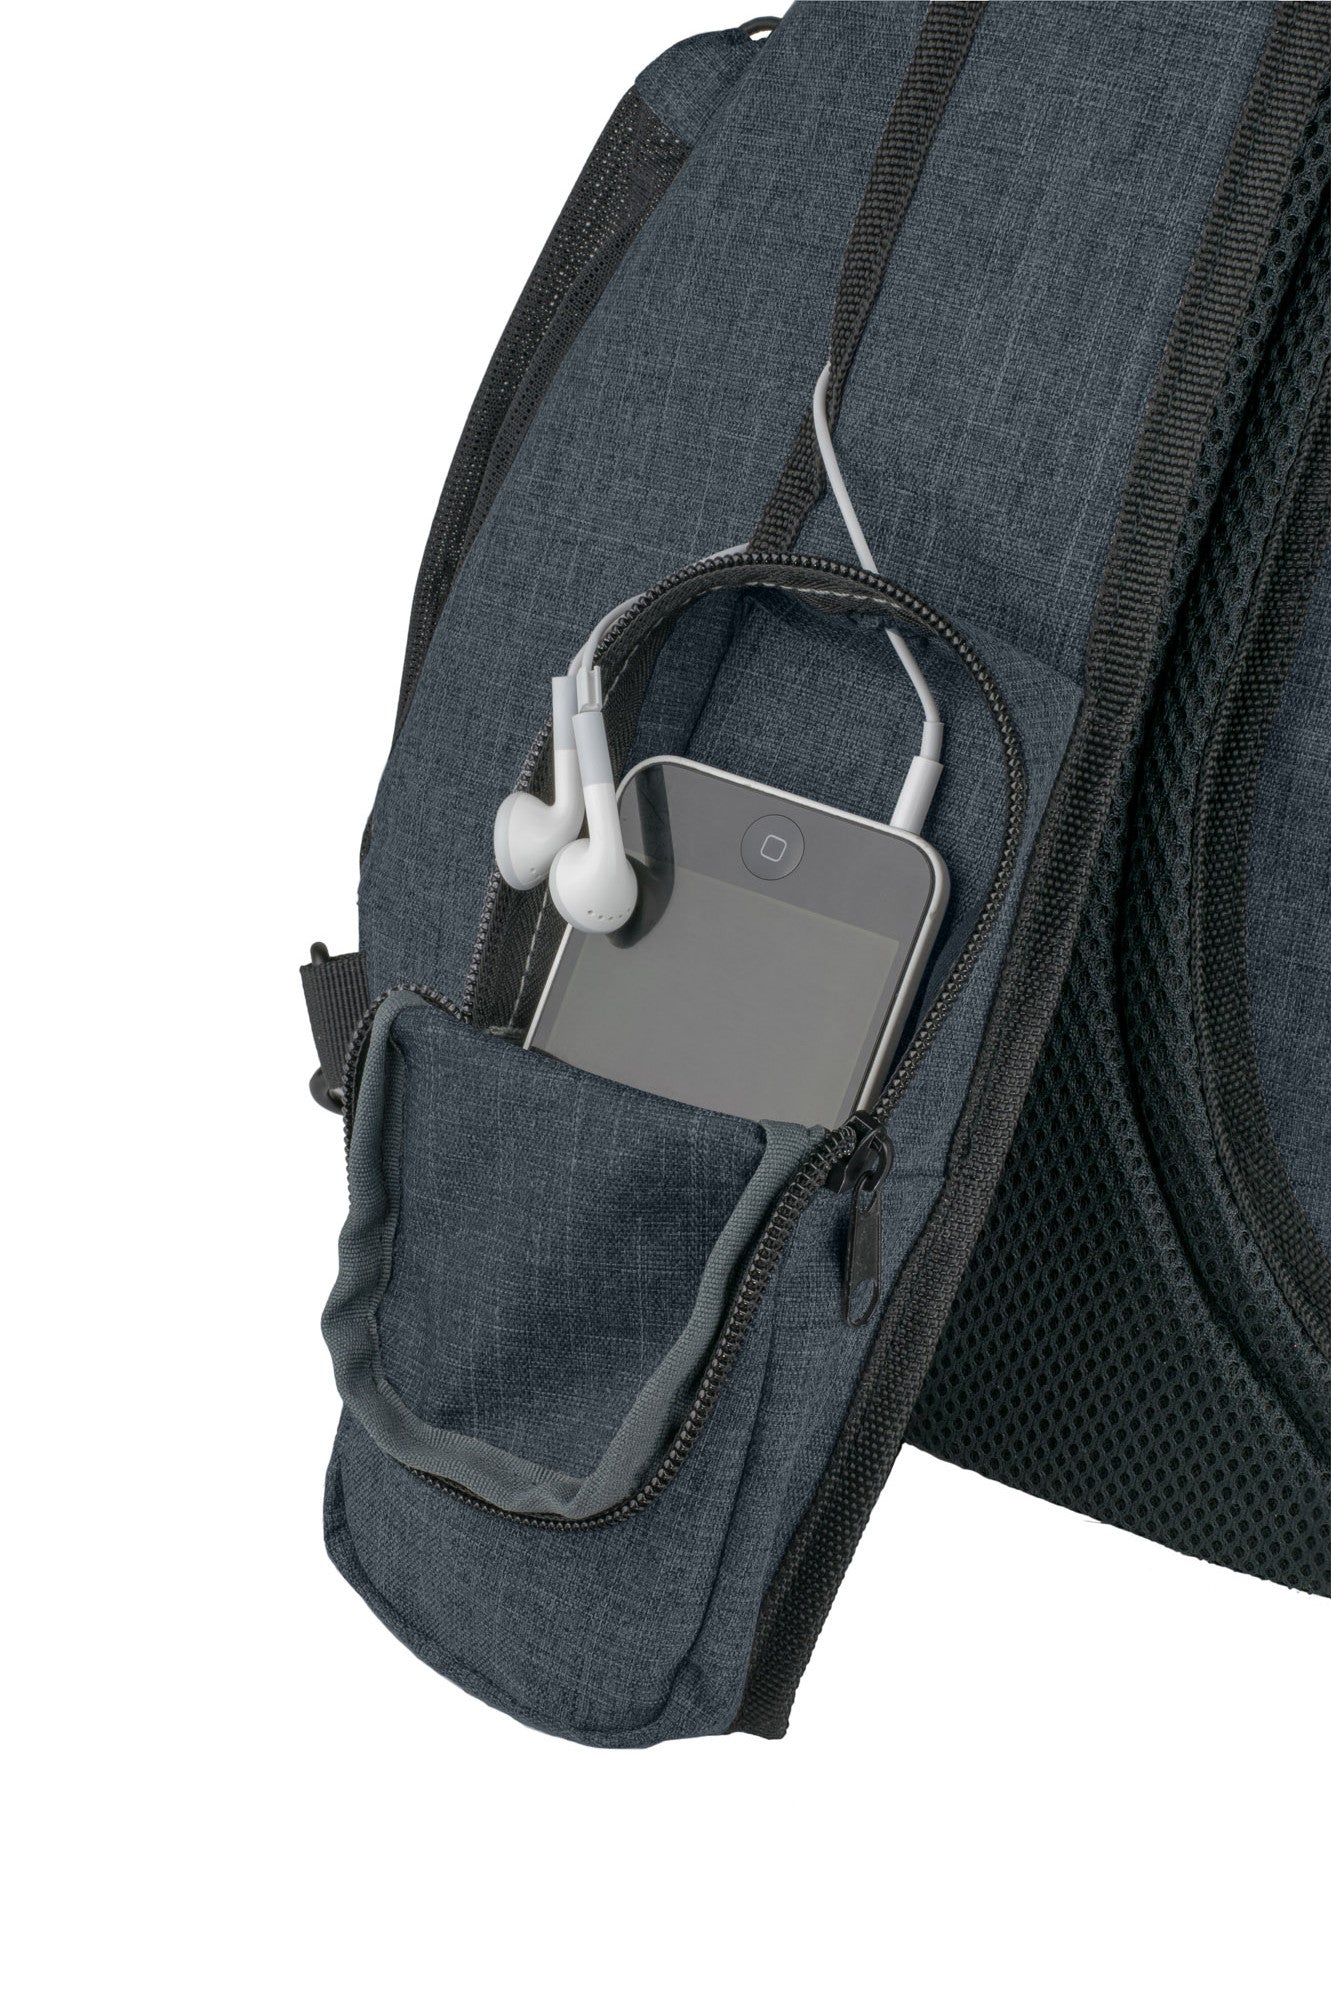 Versatile Canvas Sling Bag Backpack with RFID Security Pocket and Mult – NeatPack